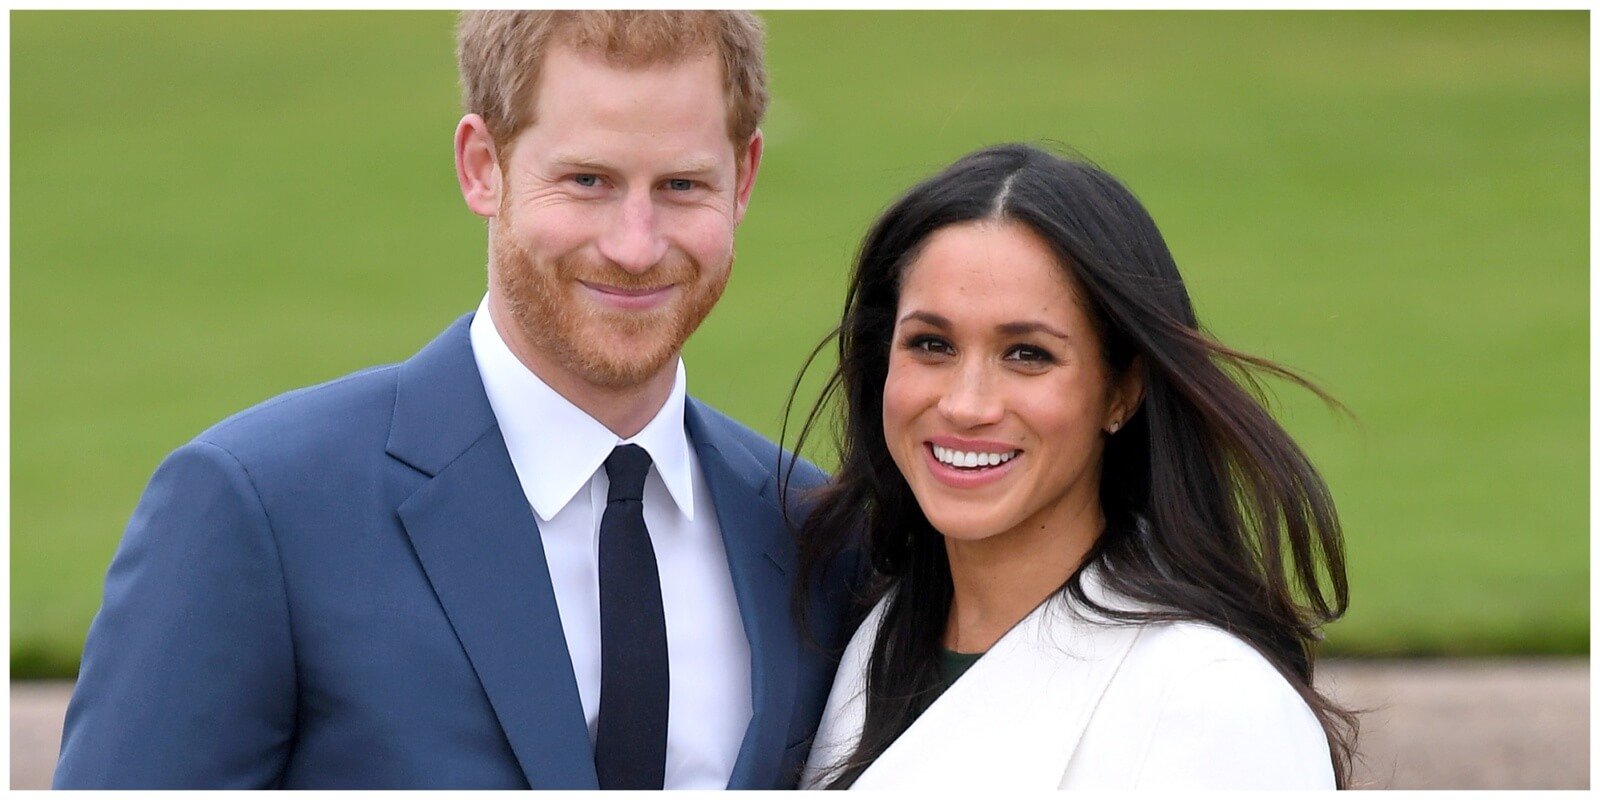 Prince Harry and Meghan Markle photographed during their engagement in 2017.